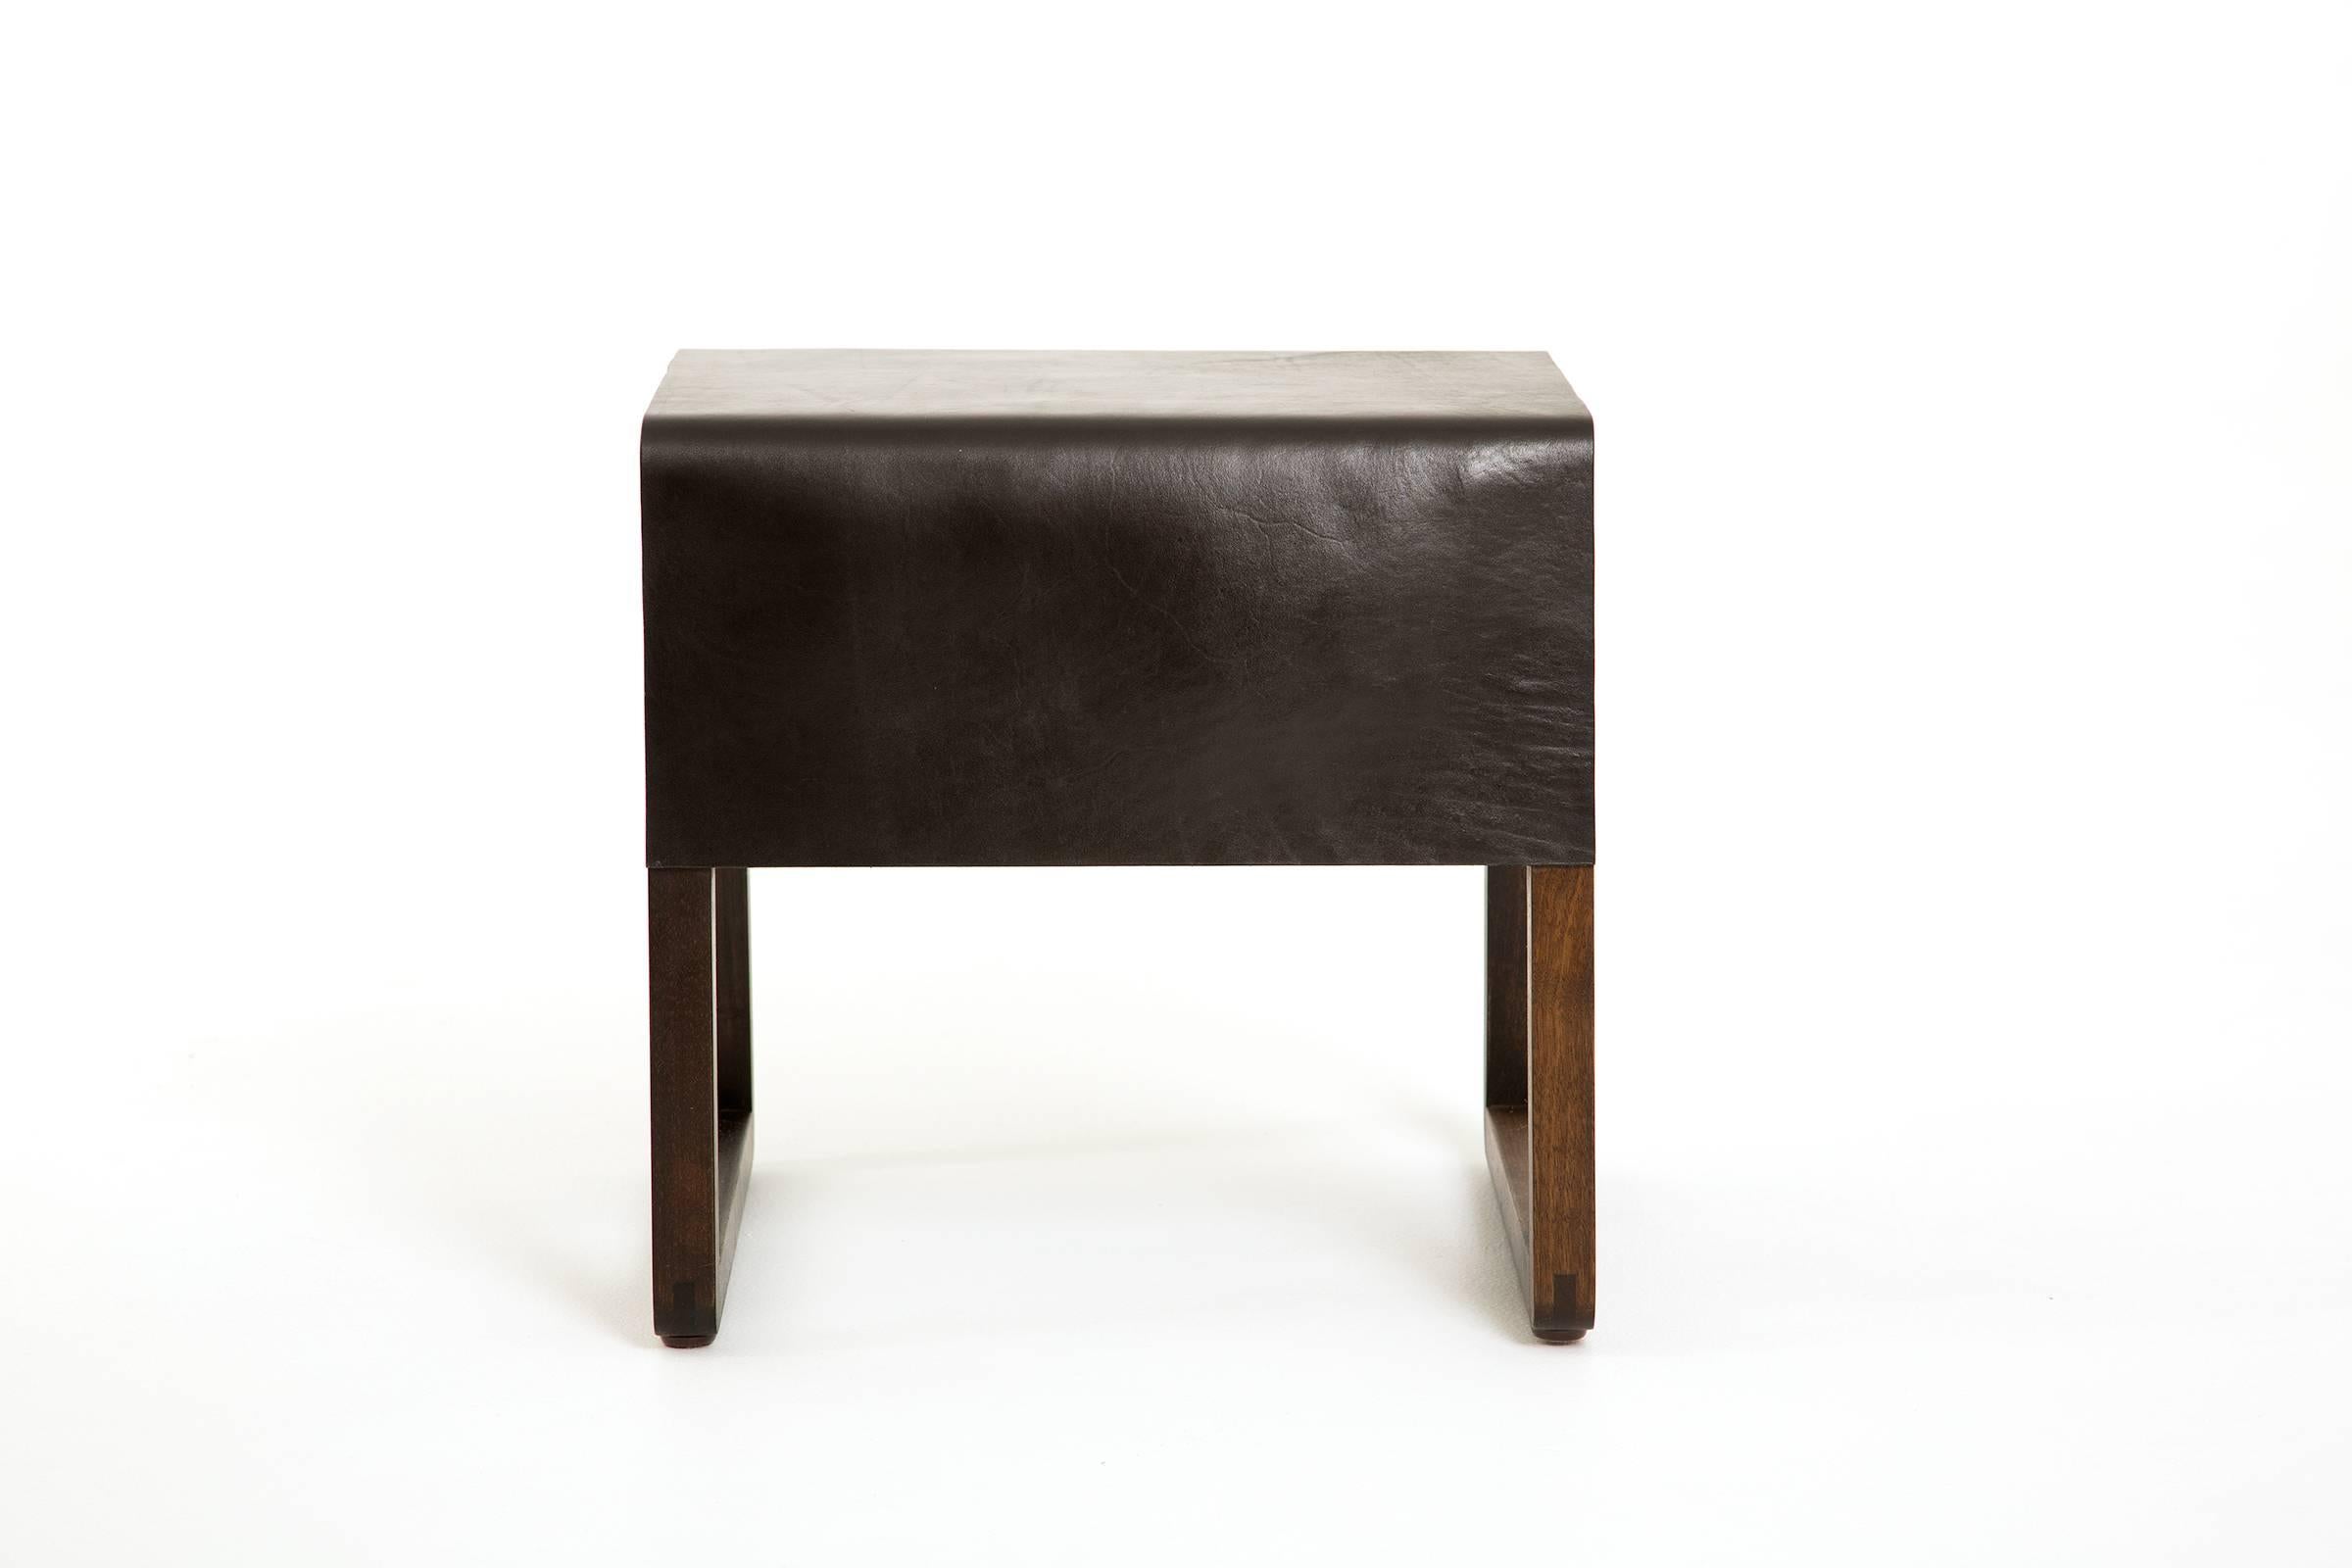 American Leather Top Low Stool in Walnut by Max Greenberg for Works Progress, 2016